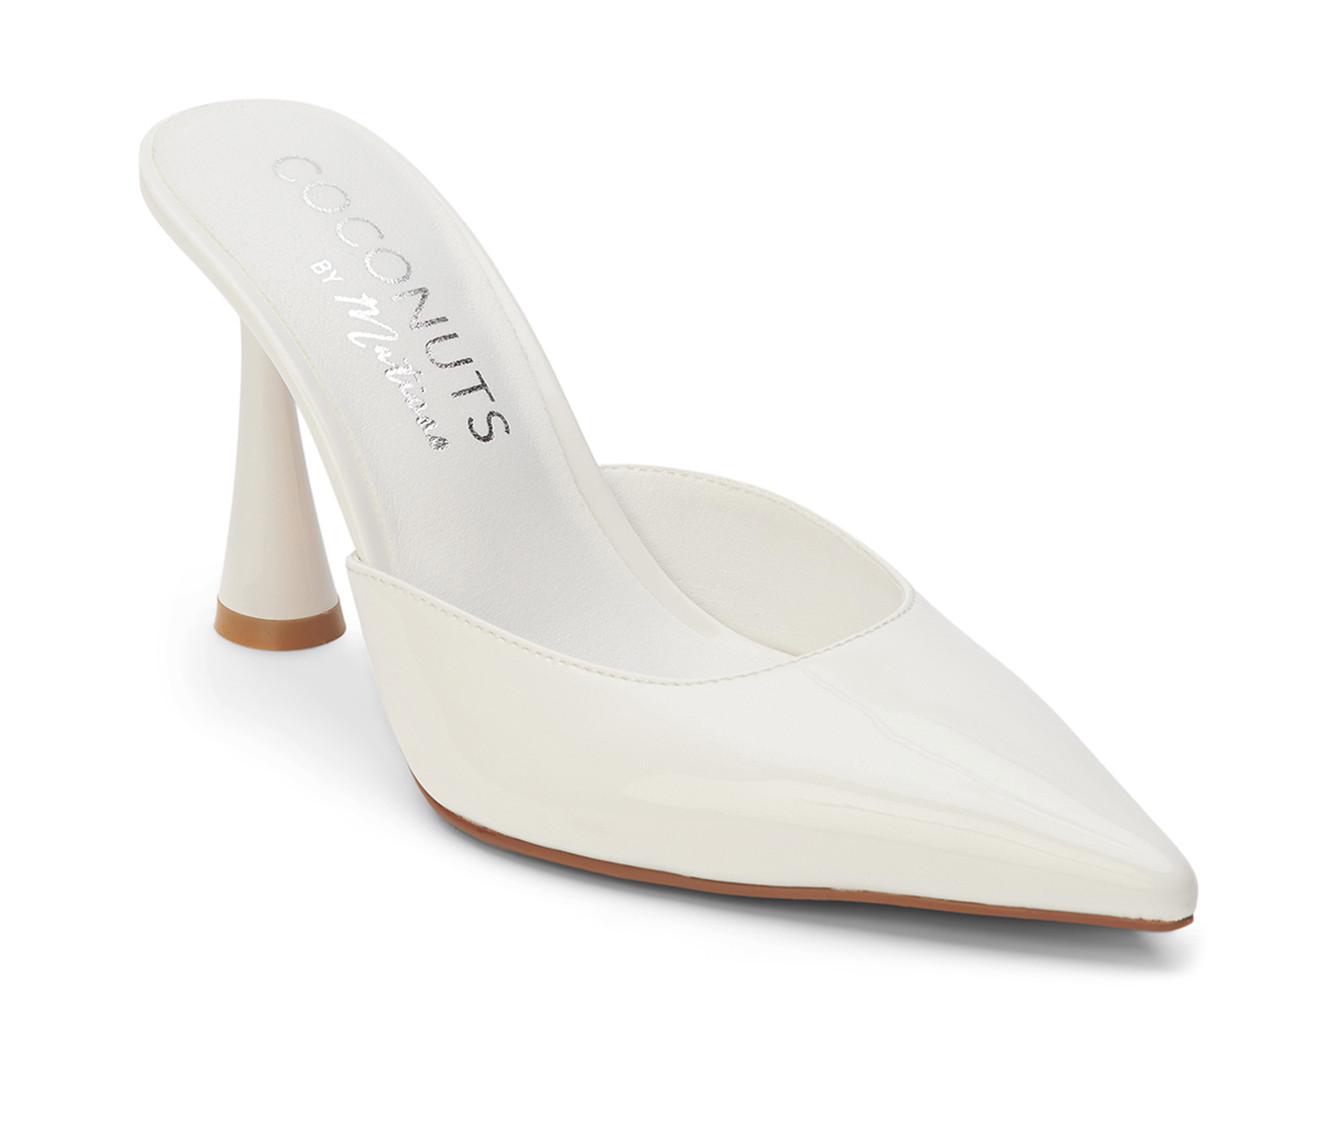 Women's Coconuts by Matisse Zola Pumps